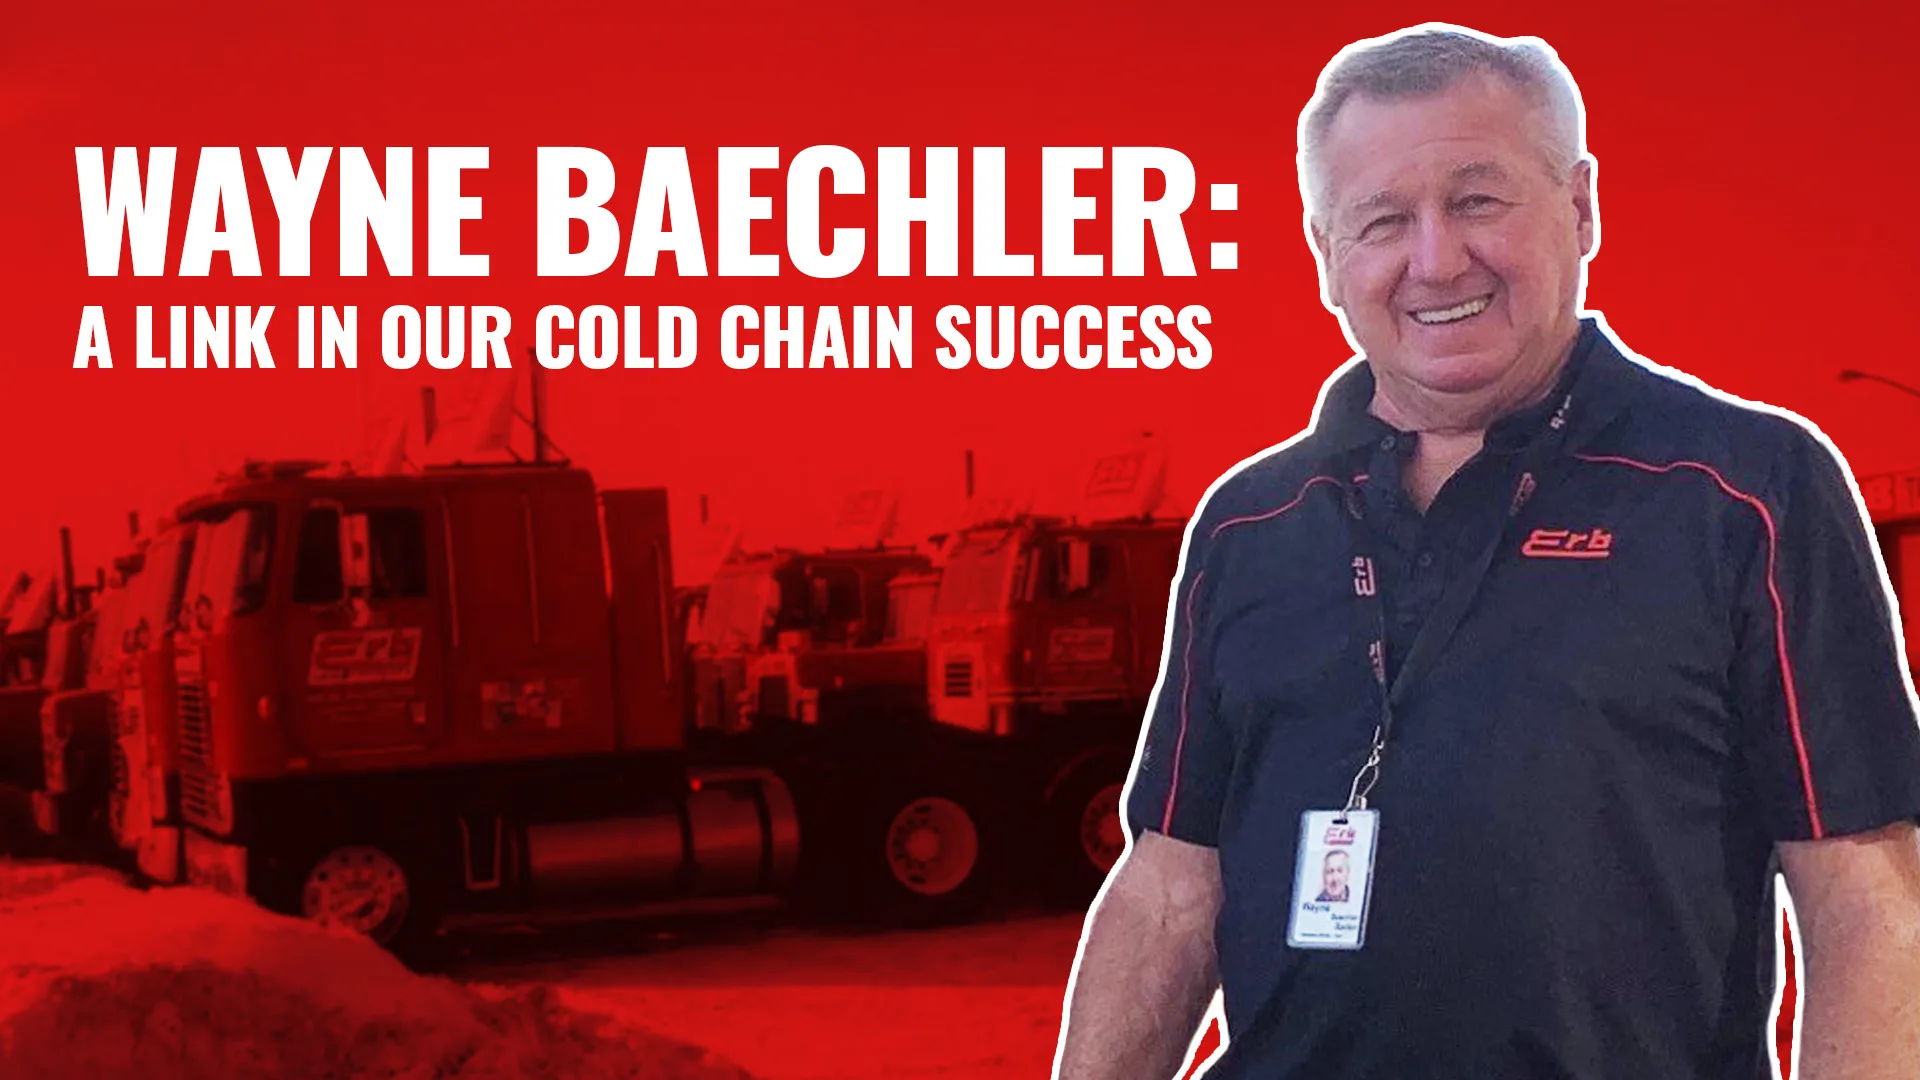 WAYNE BAECHLER: A LINK IN OUR COLD CHAIN SUCCESS